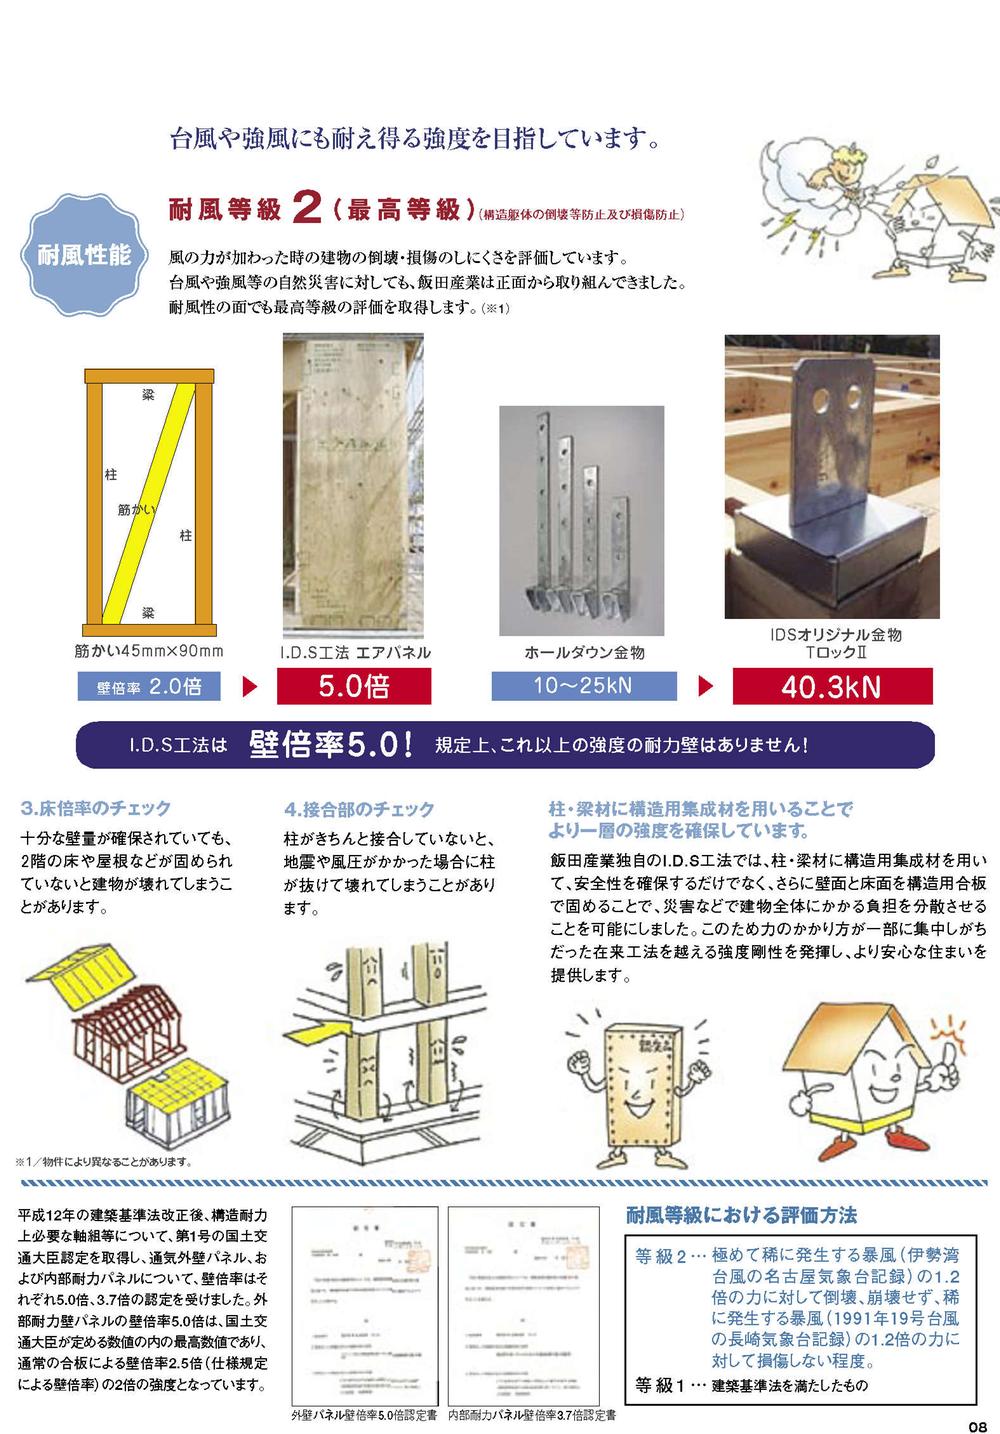 Construction ・ Construction method ・ specification. I ・ D ・ S construction method wall magnification 5.0! Provisions on, There is no load-bearing walls of the more strength! 